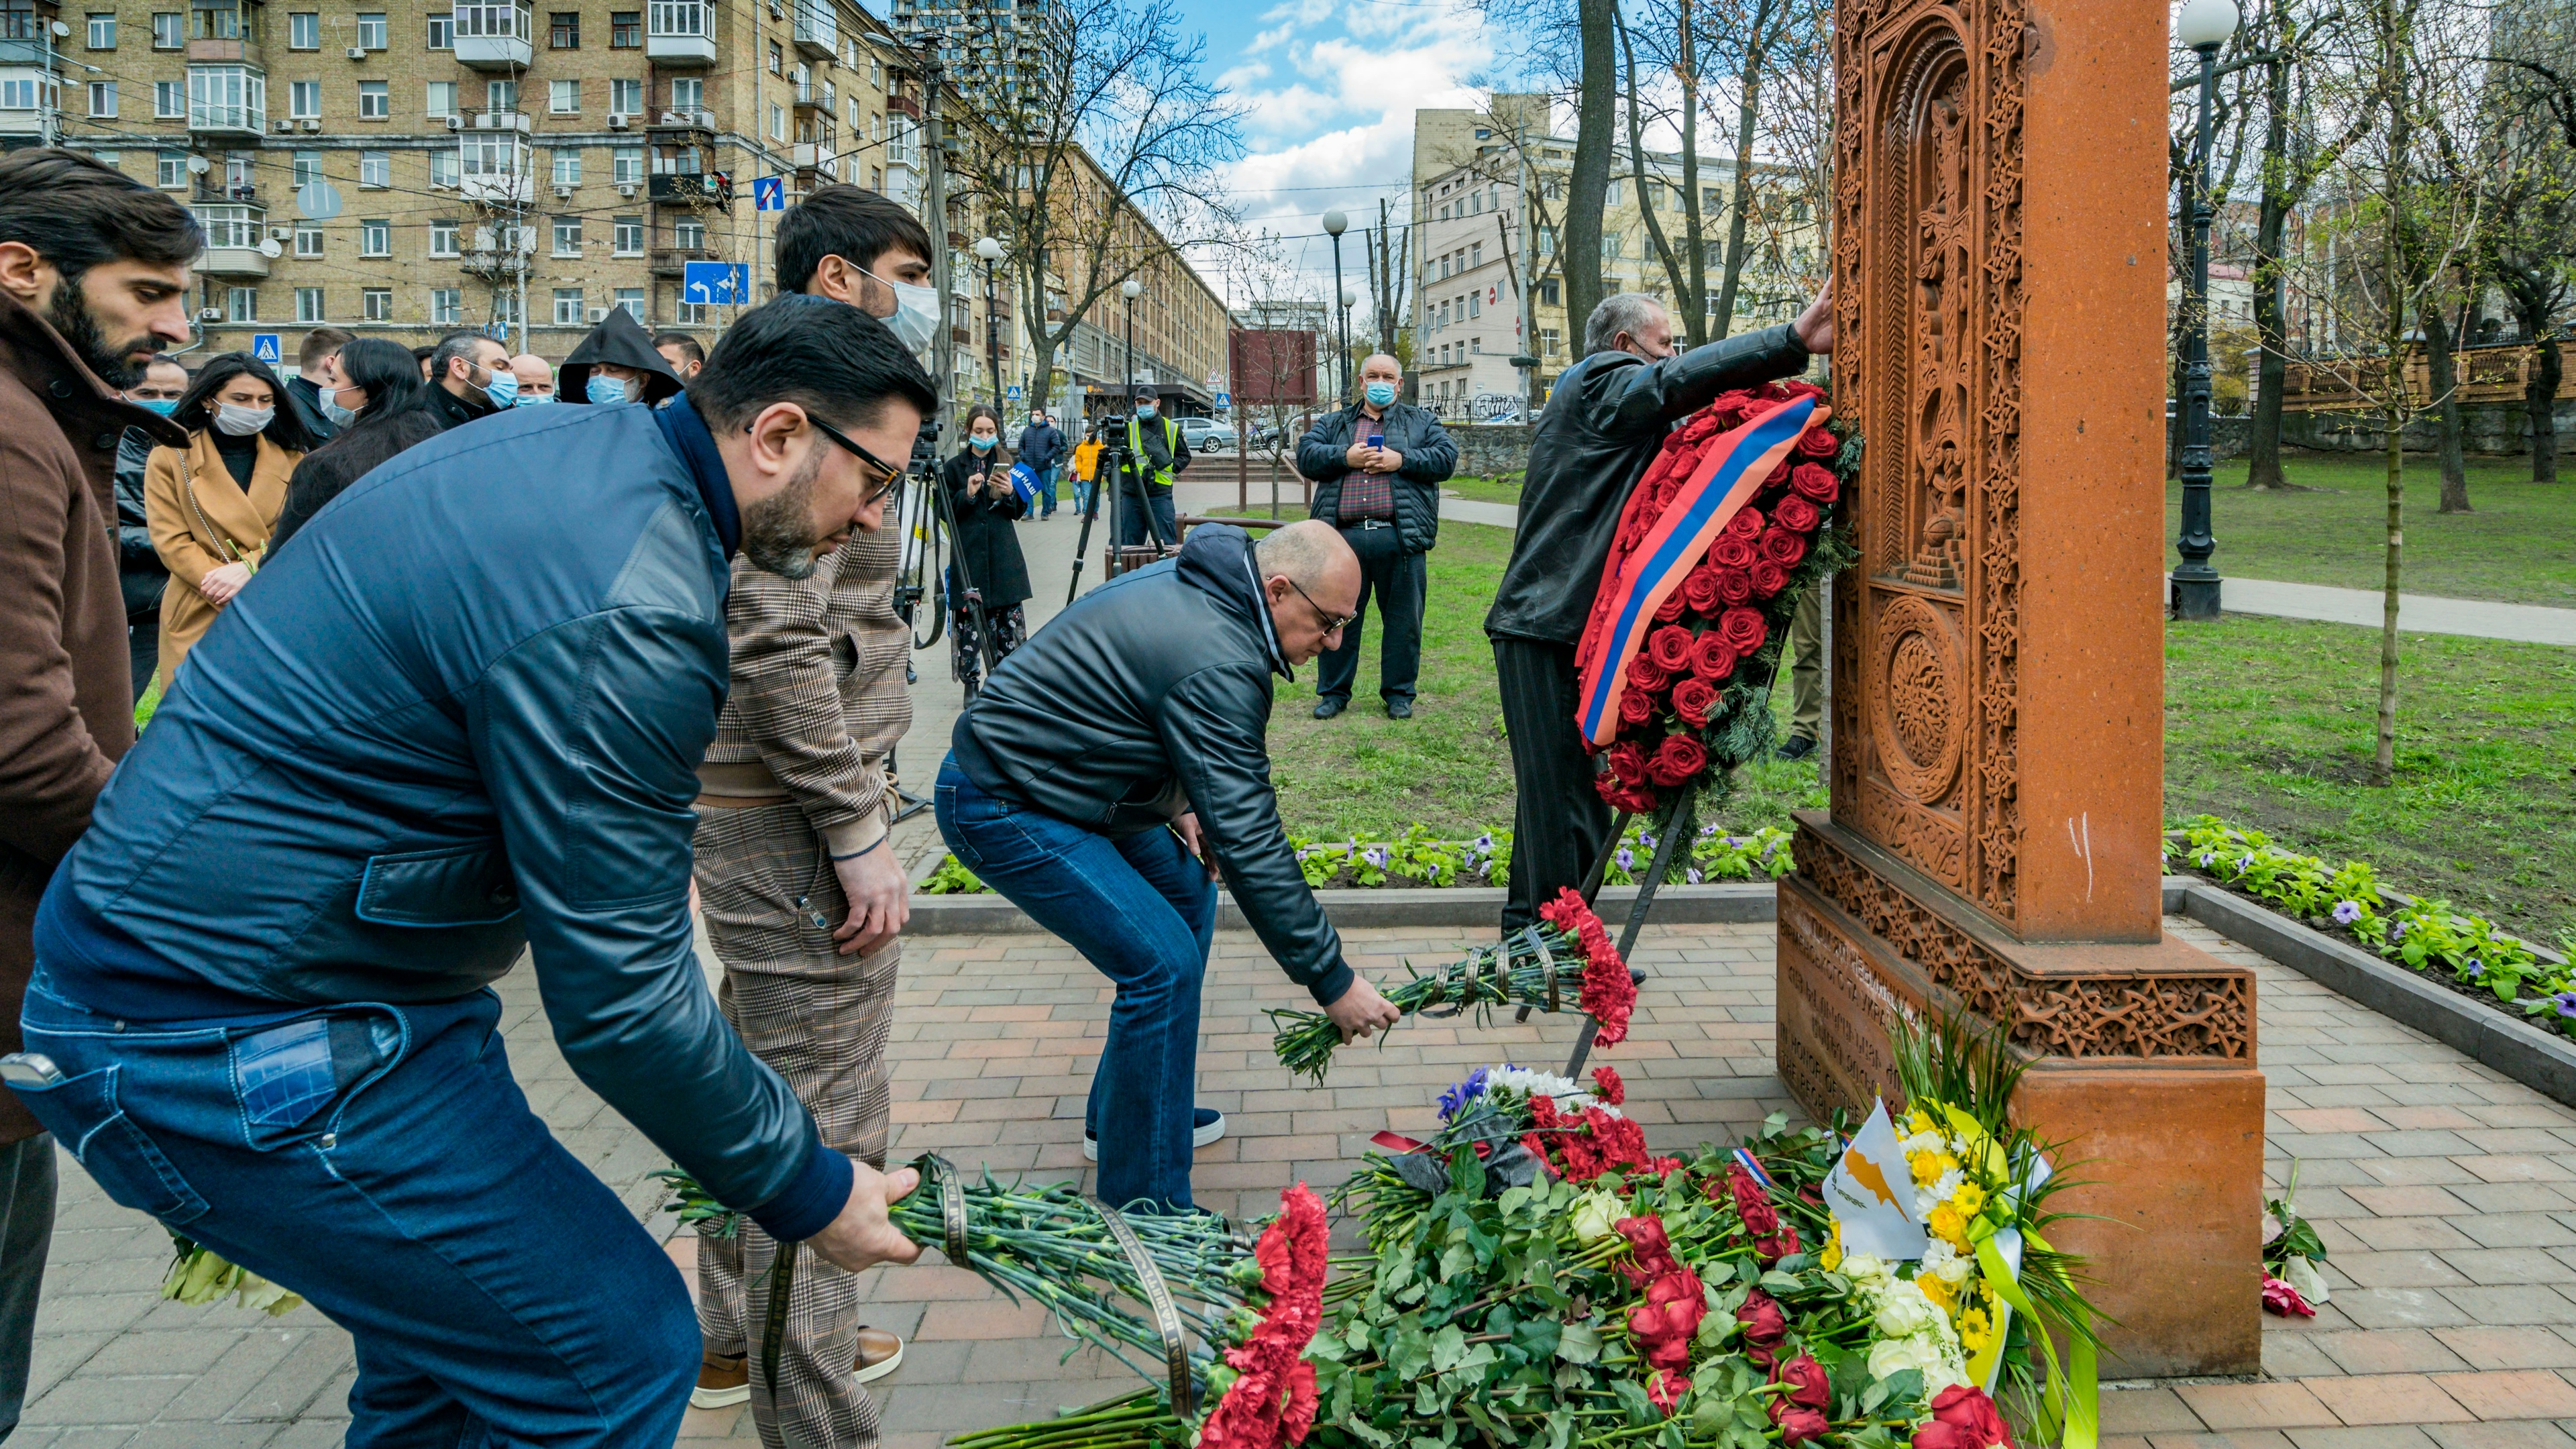 People leave flowers under a khachkar, a memorial stone stele of armenian culture, during the Armenian Genocide Remembrance Day in Kiev, Ukraine. 